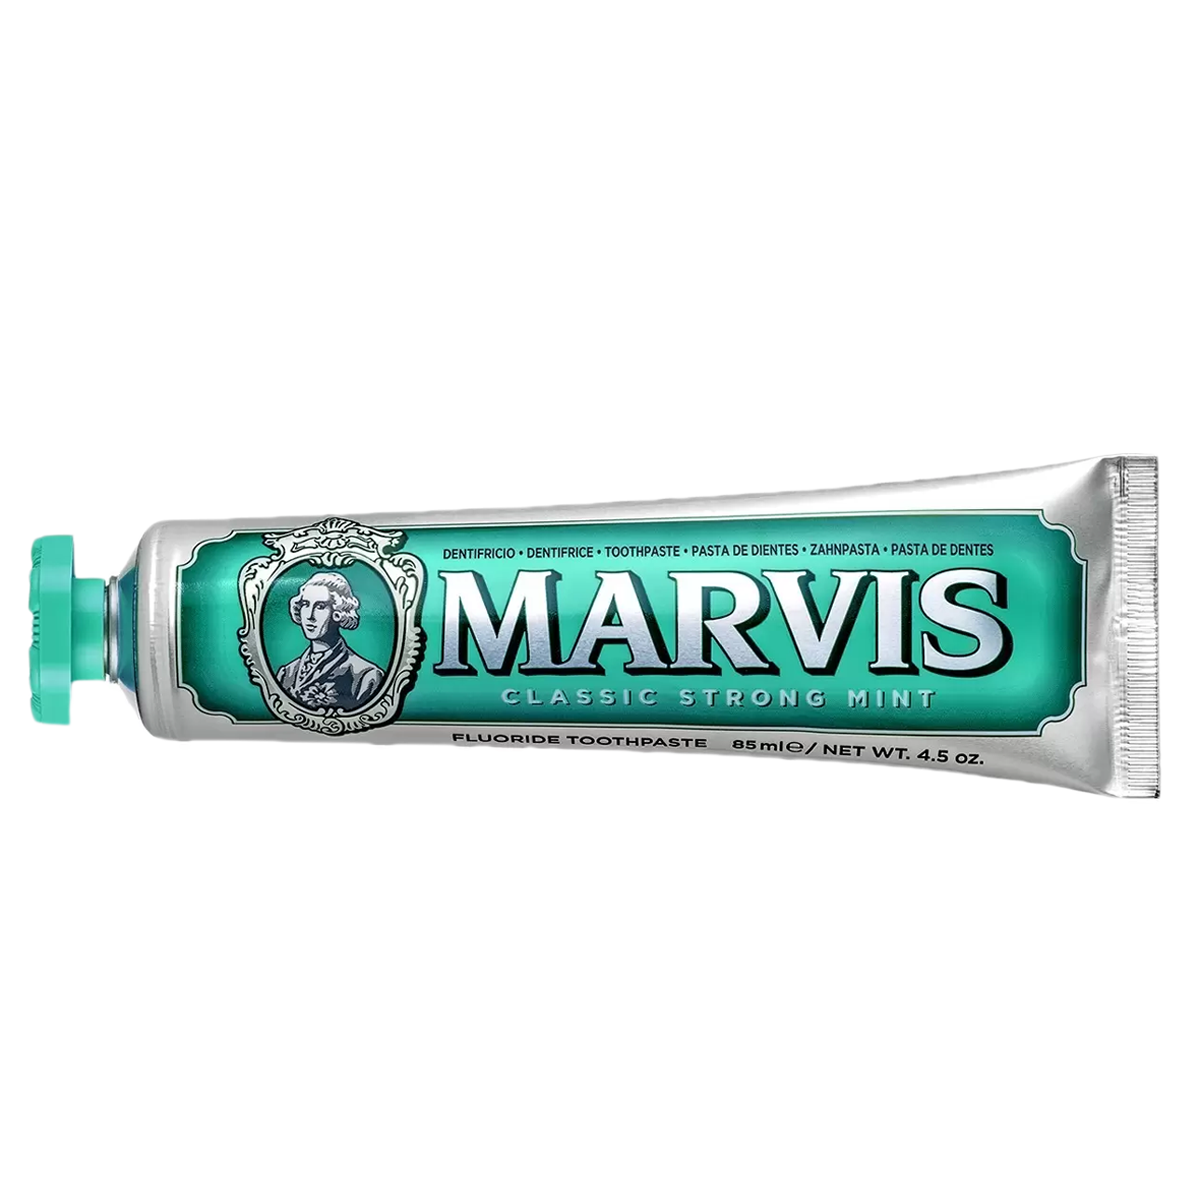 Dentífrico Marvis Classic Strong Mint